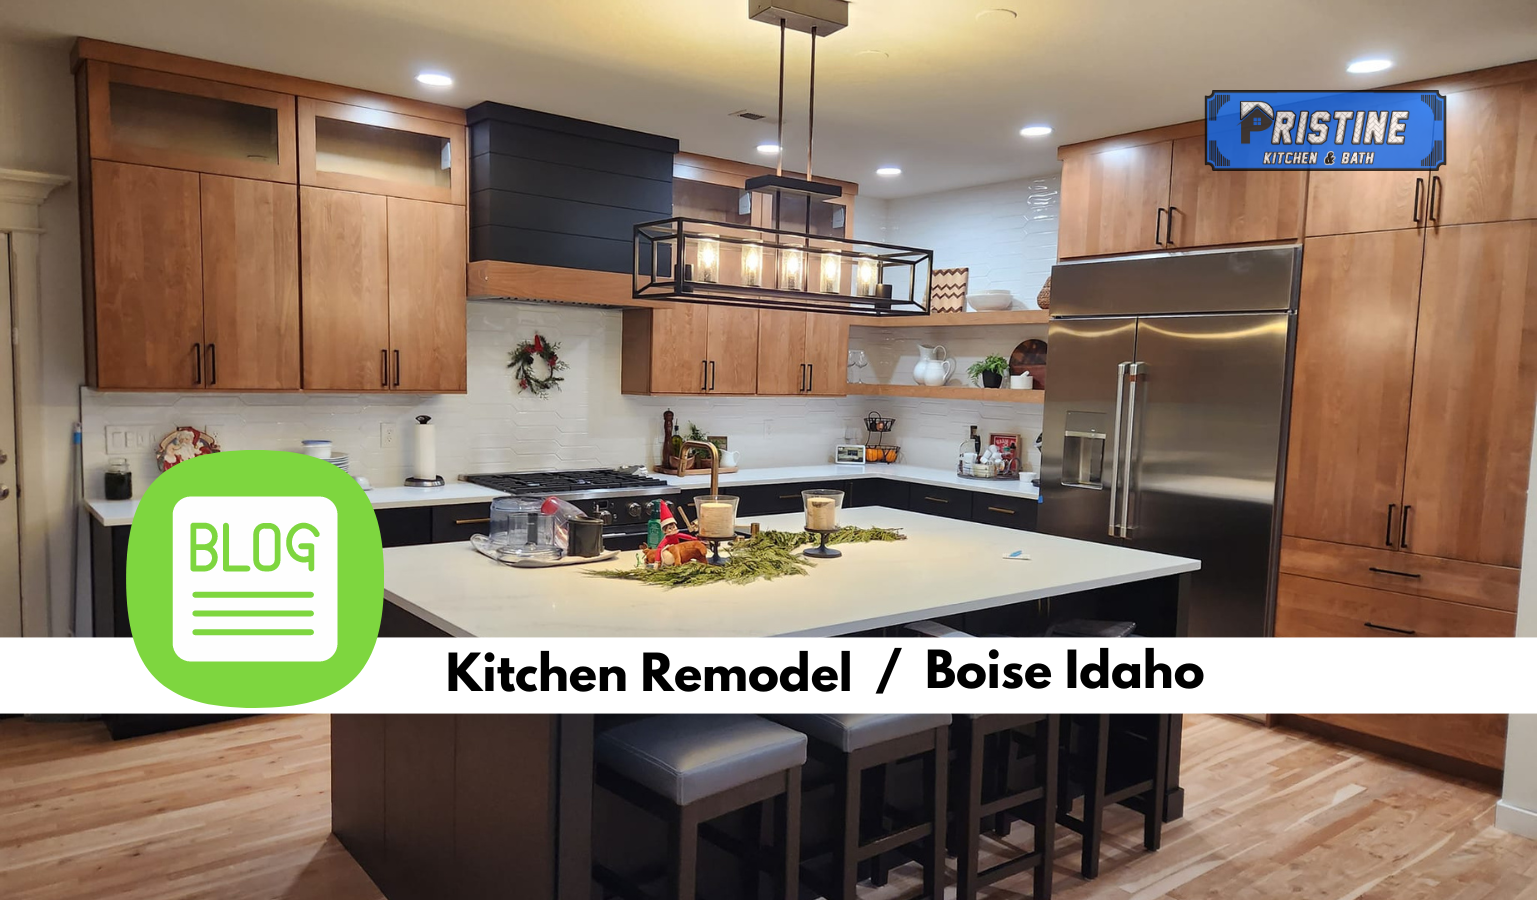 Kitchen Renovation Contractor in Boise Idaho